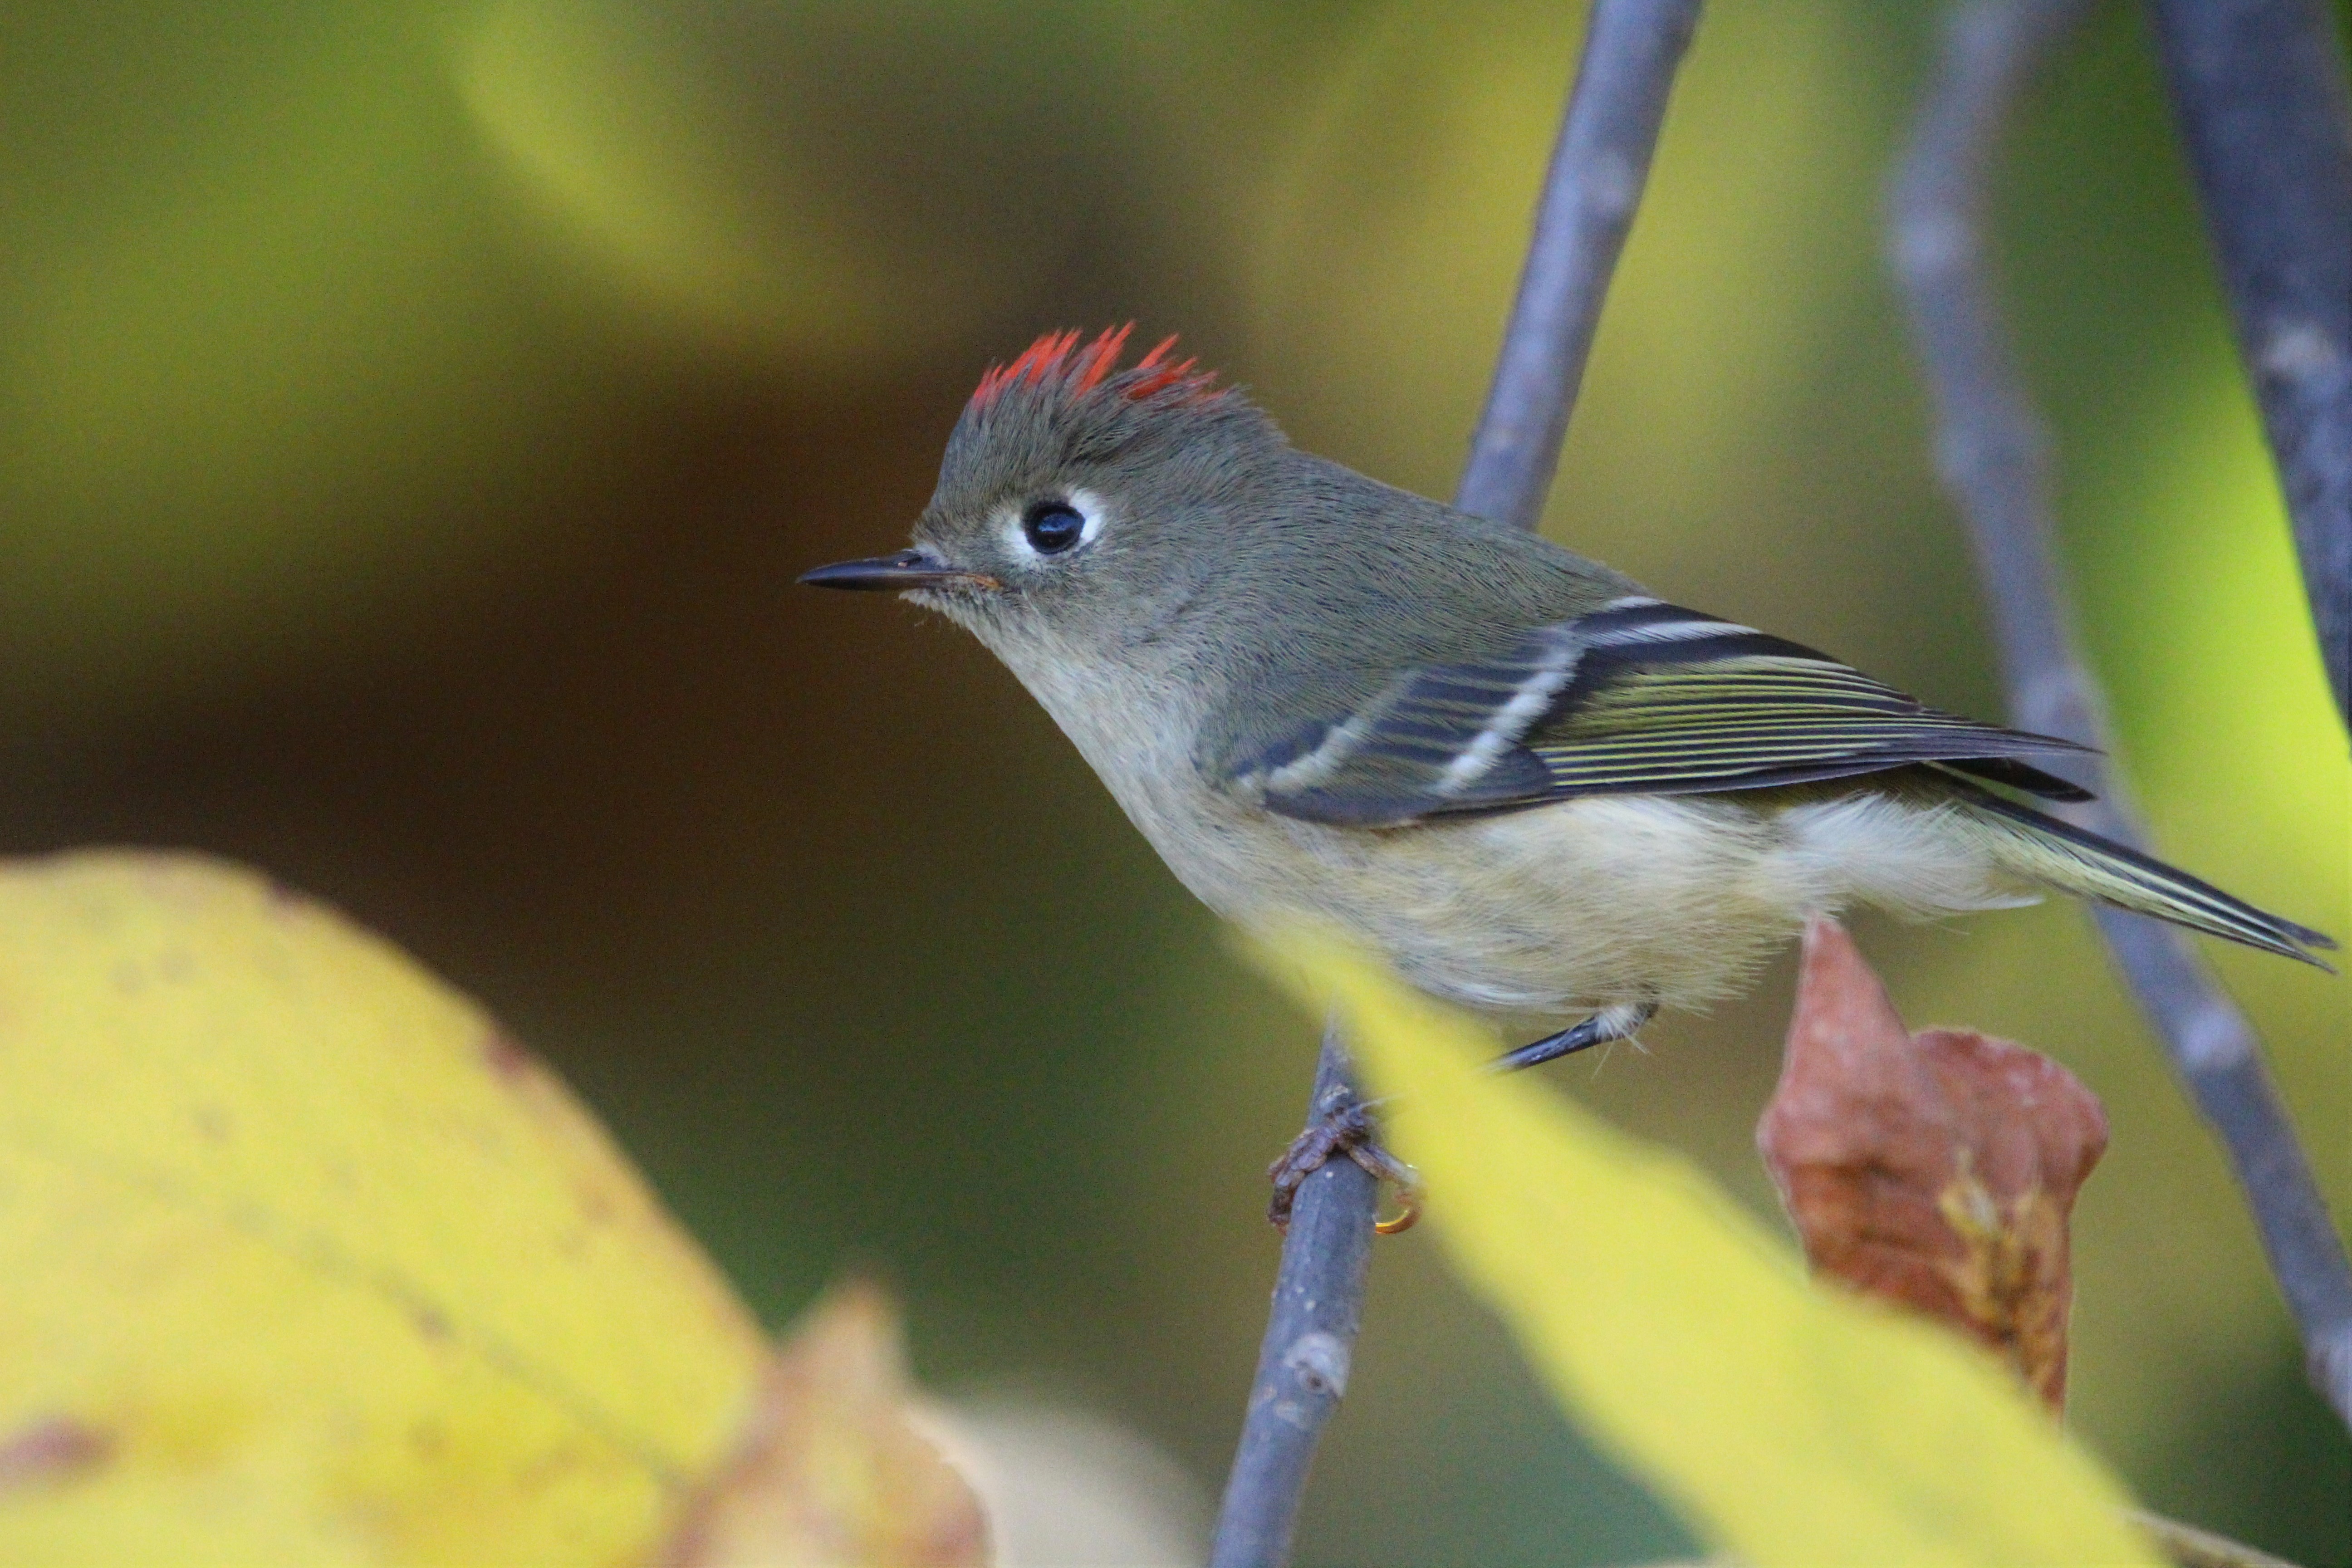 The male Ruby-crowned Kinglet’s colorful head patch is raised into a ragged crest when the tiny bird is excited, often when the bird is singing or scolding. Photo: <a href=\"https://www.flickr.com/photos/89780664@N05/\" target=\"_blank\">Dave Ostapiuk</a> 